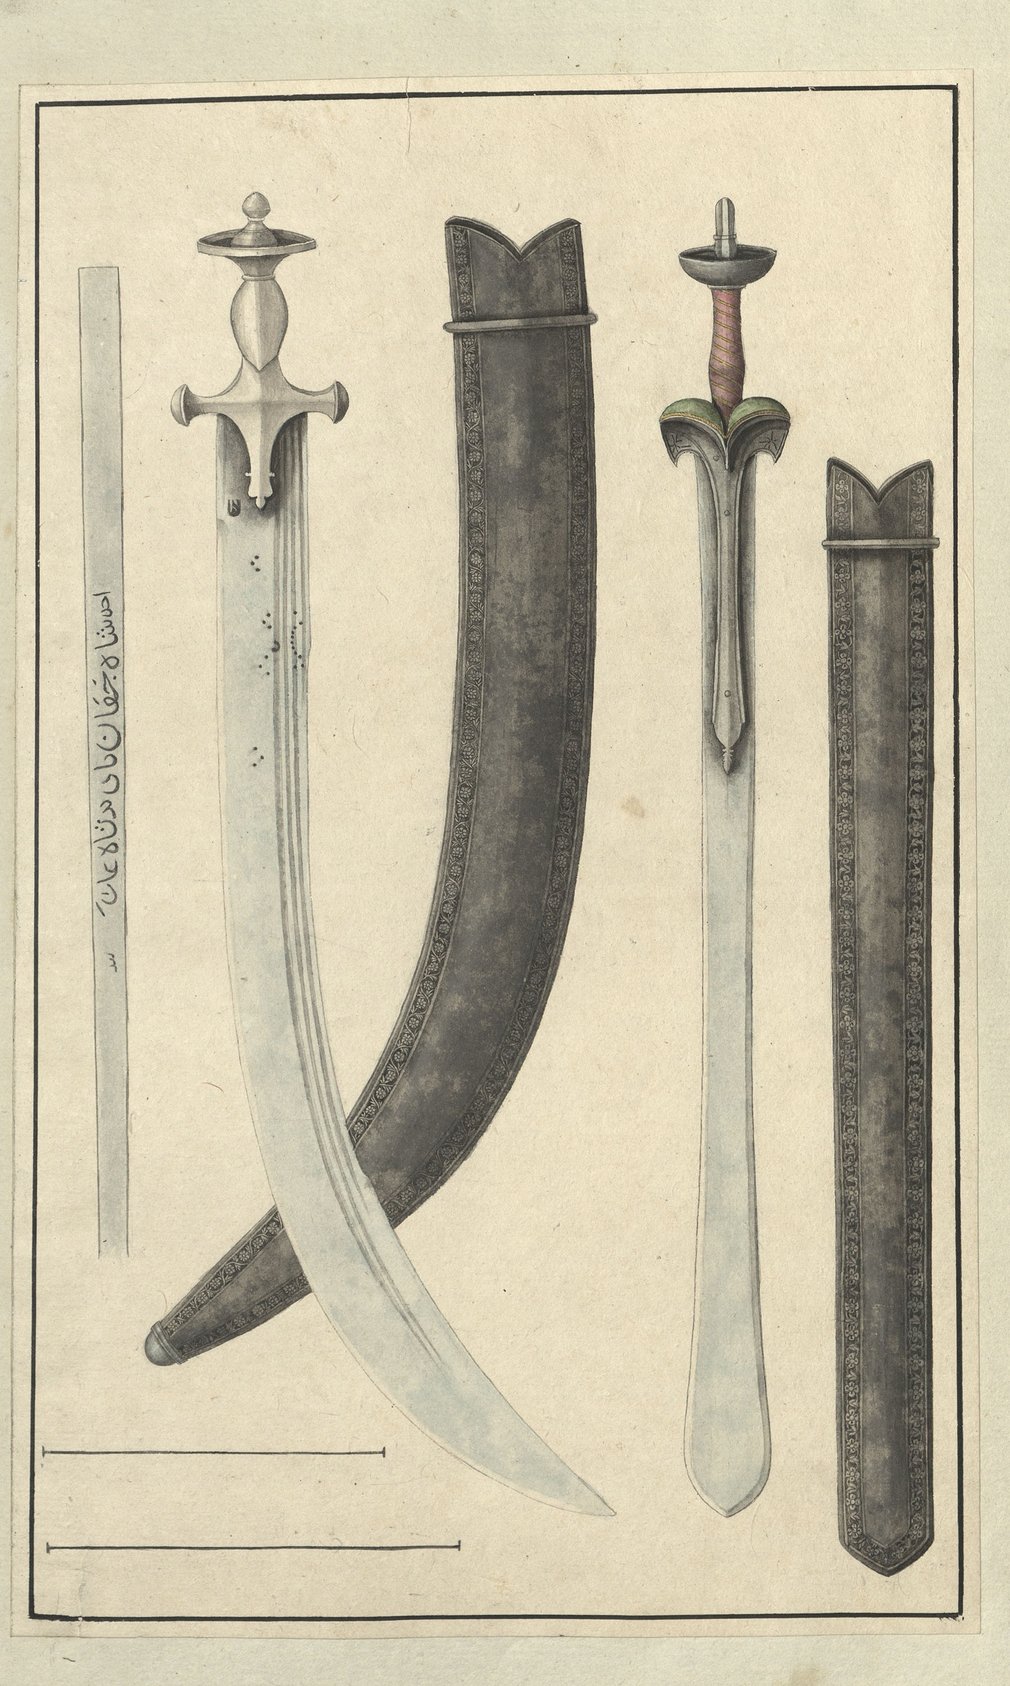 Black and white illustration of two swords